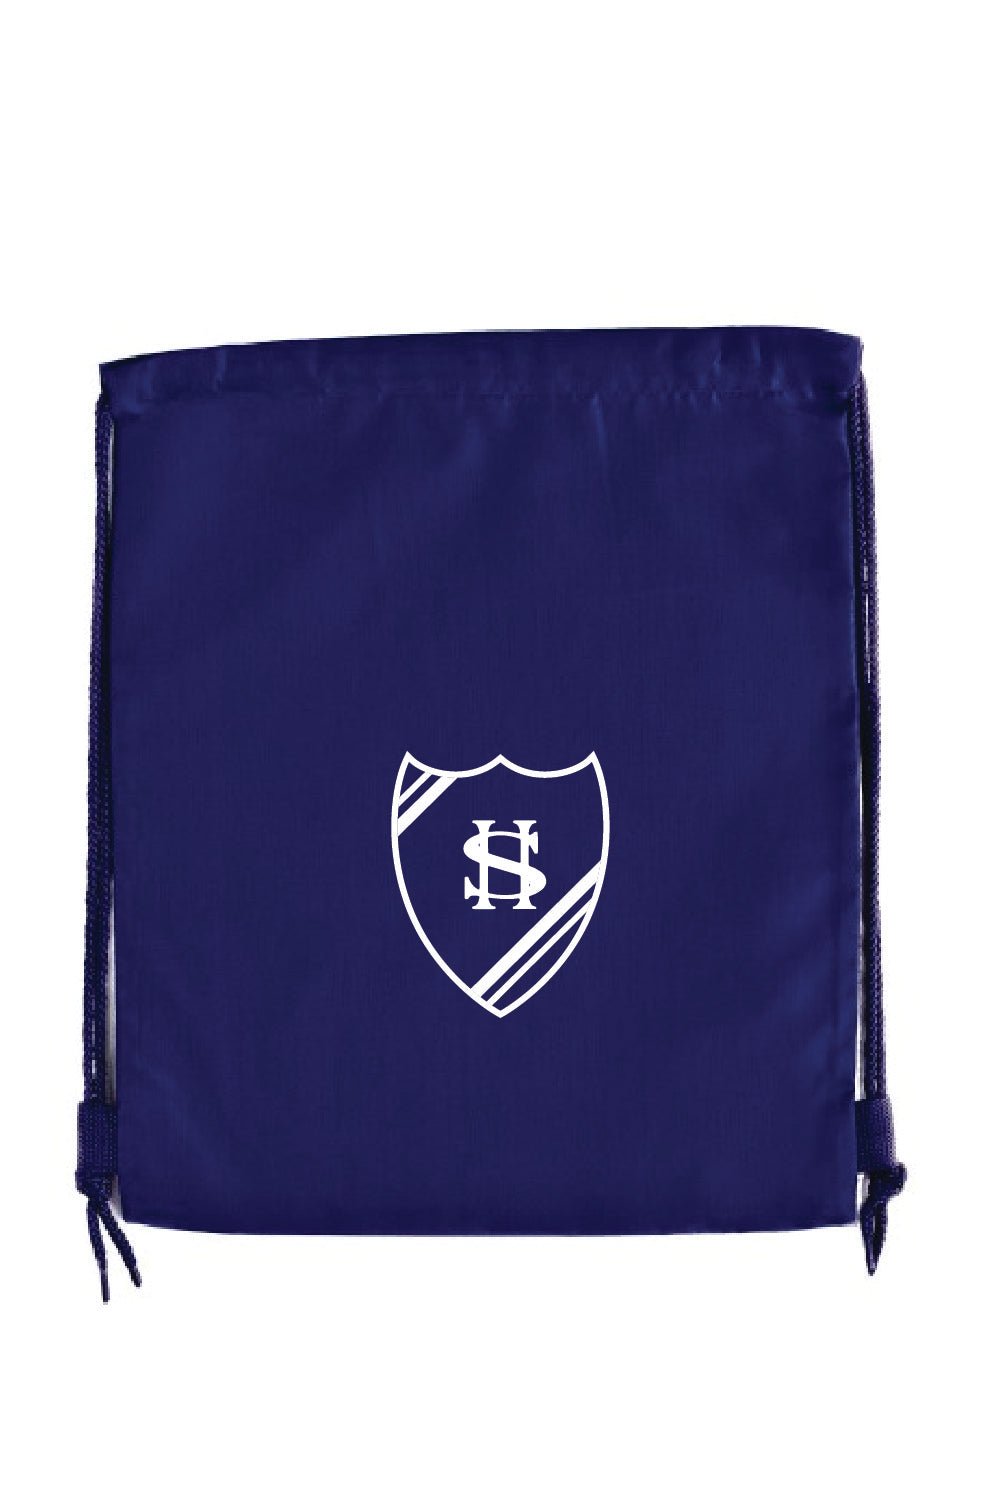 S.H PE bag with personalisation - Uniformwise Schoolwear